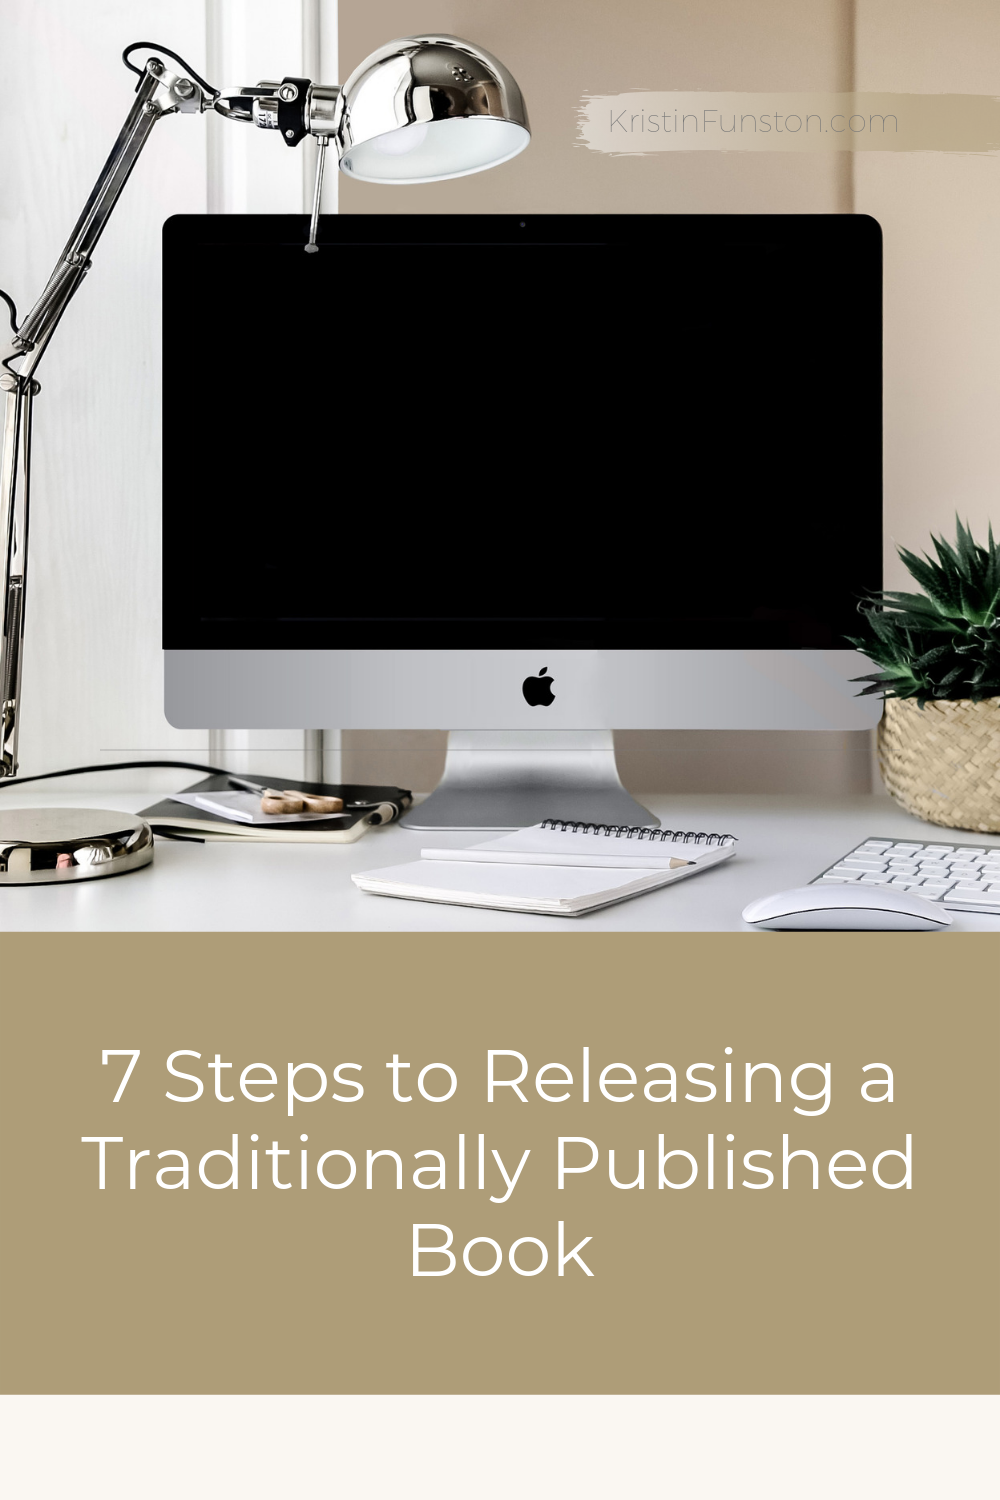 7 Steps to Releasing a Traditionally Published Book